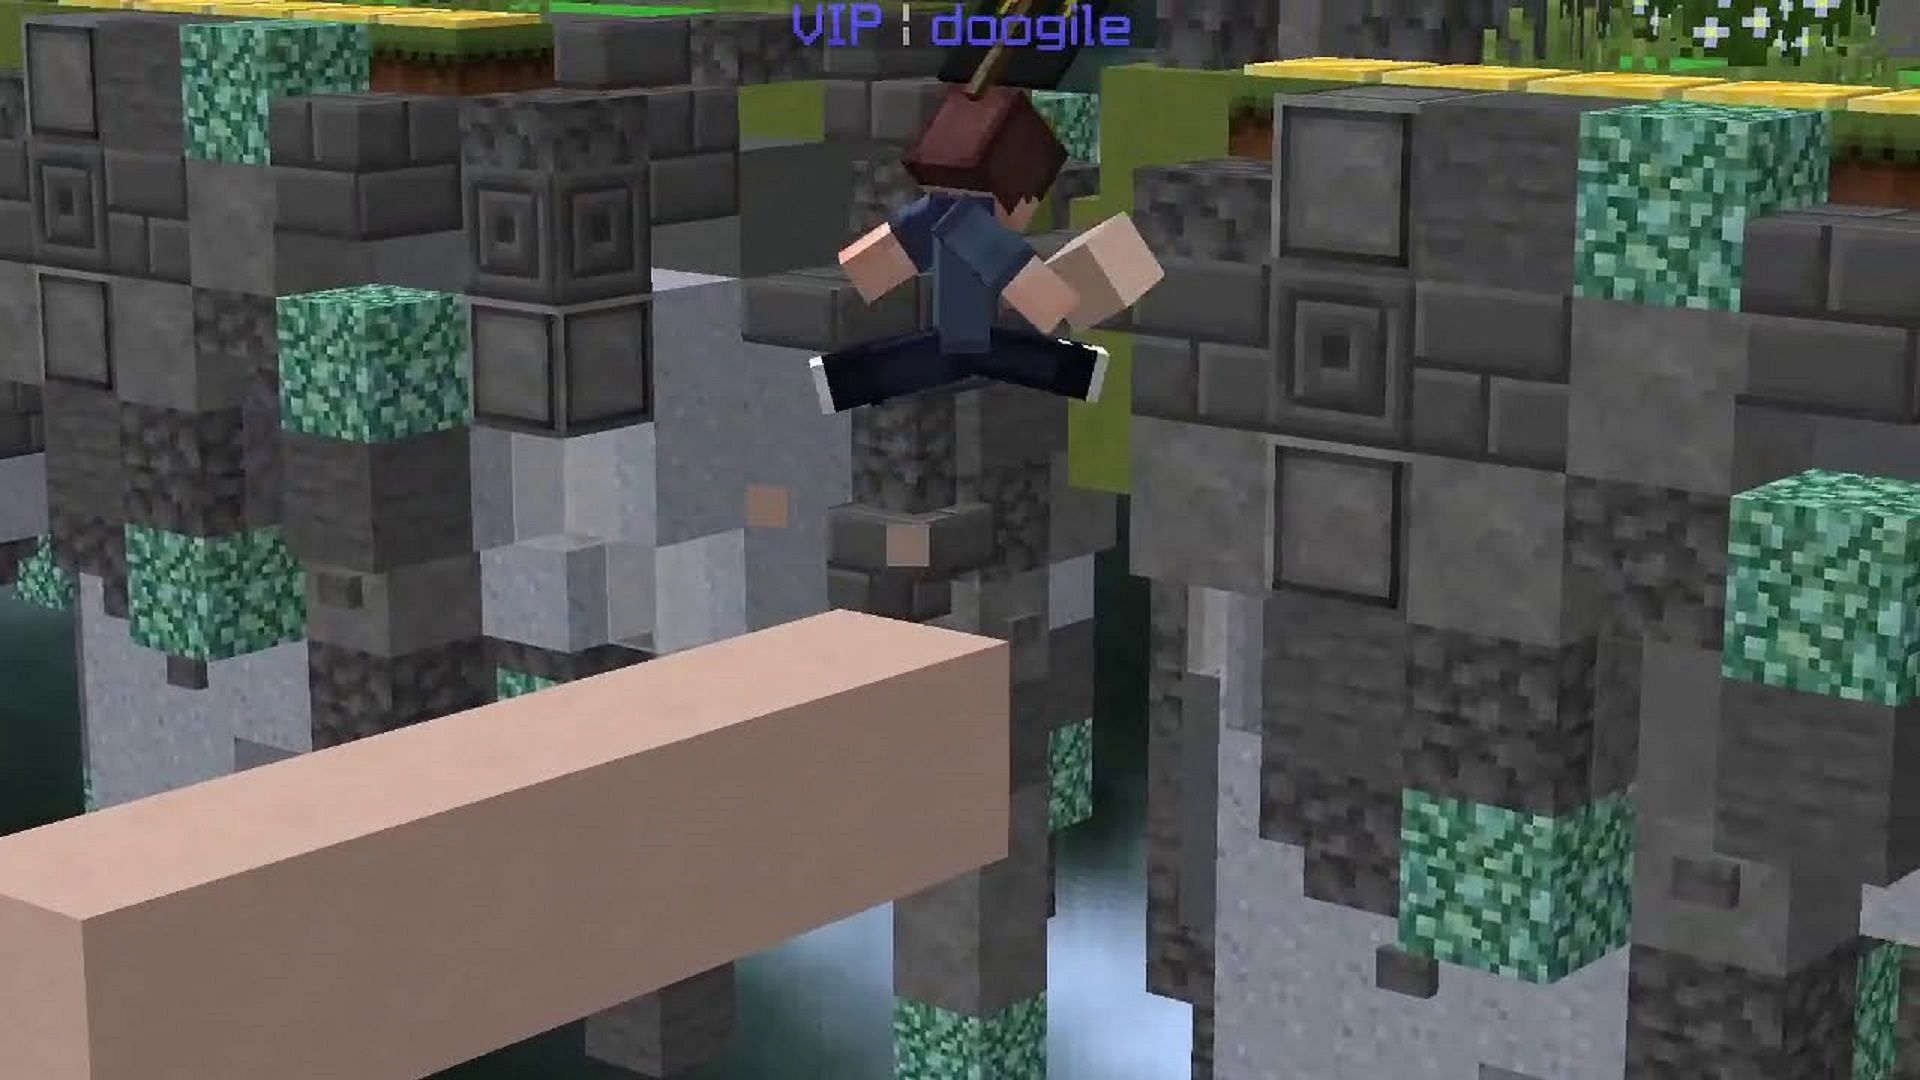 Doogile is one of a few world record holders in speedrunning Minecraft (Image via Doogile/YouTube)